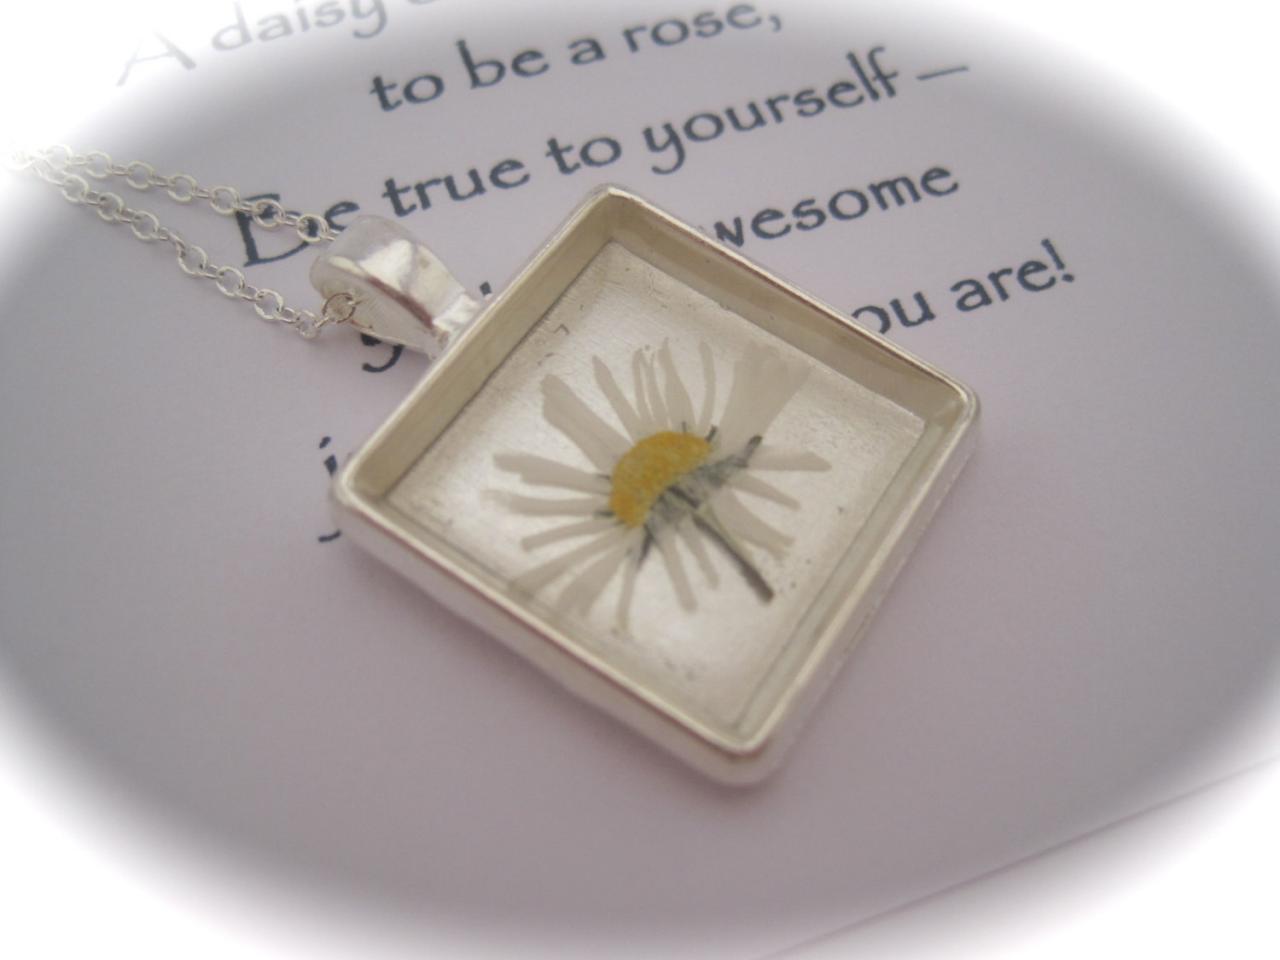 Memories Of Daisies In The Garden - A Real Daisy Memory Necklace